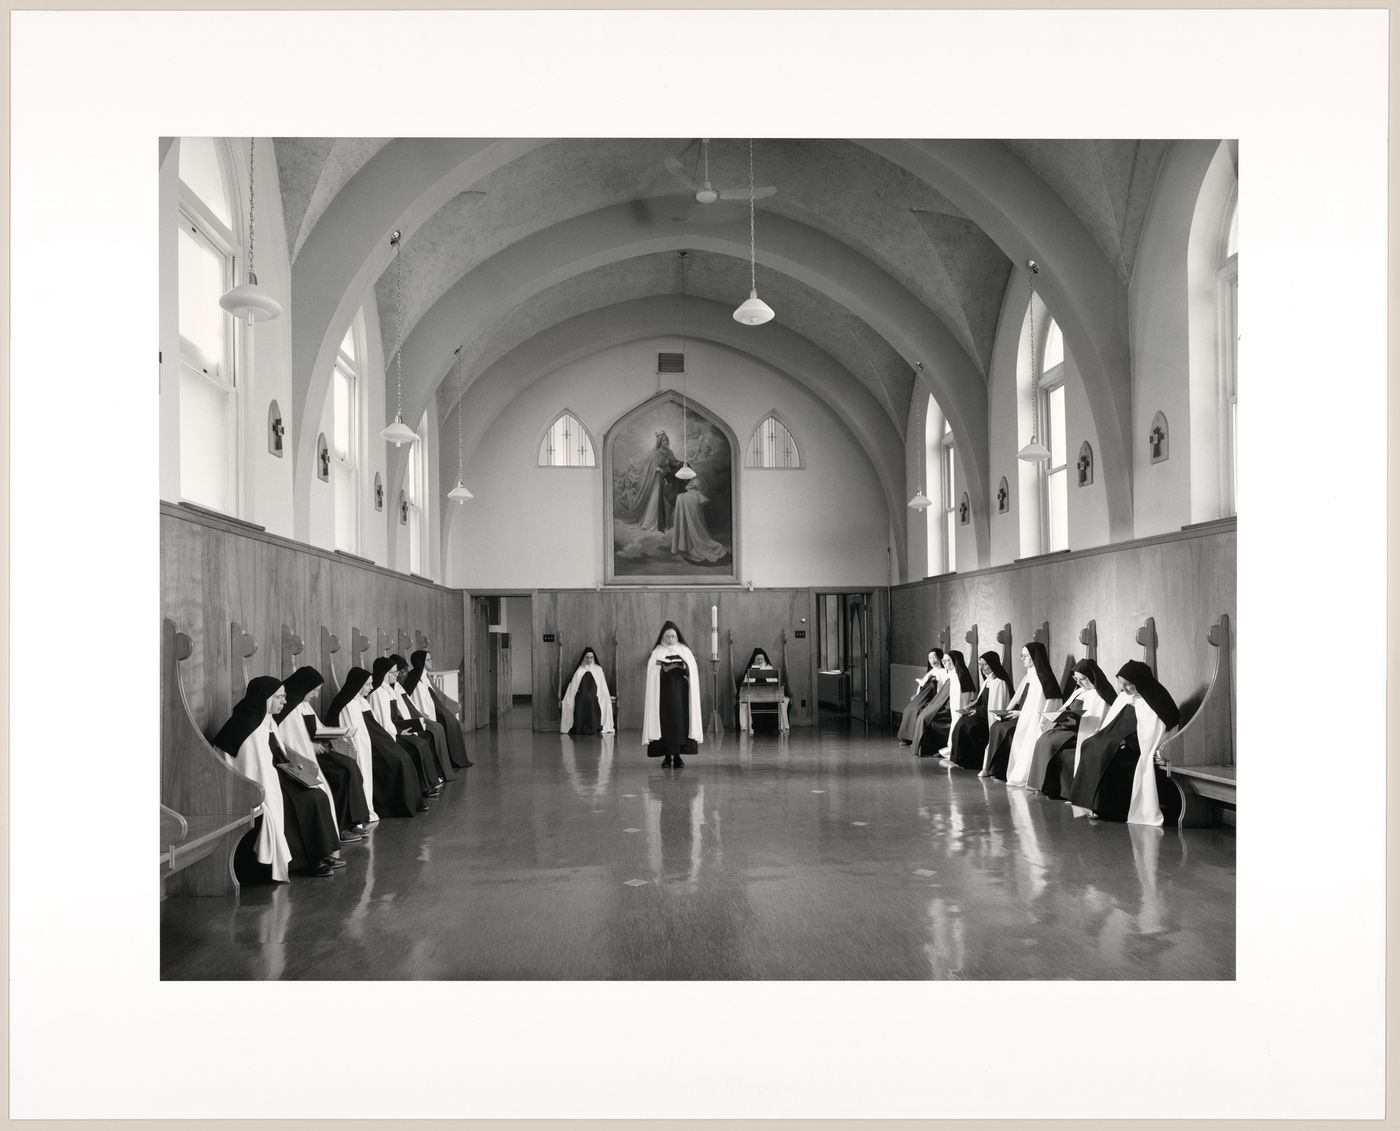 View of interior of the choir with the Carmélite nuns sitting along the sides, from the Convent Series, Trois-Rivières, Québec, Canada